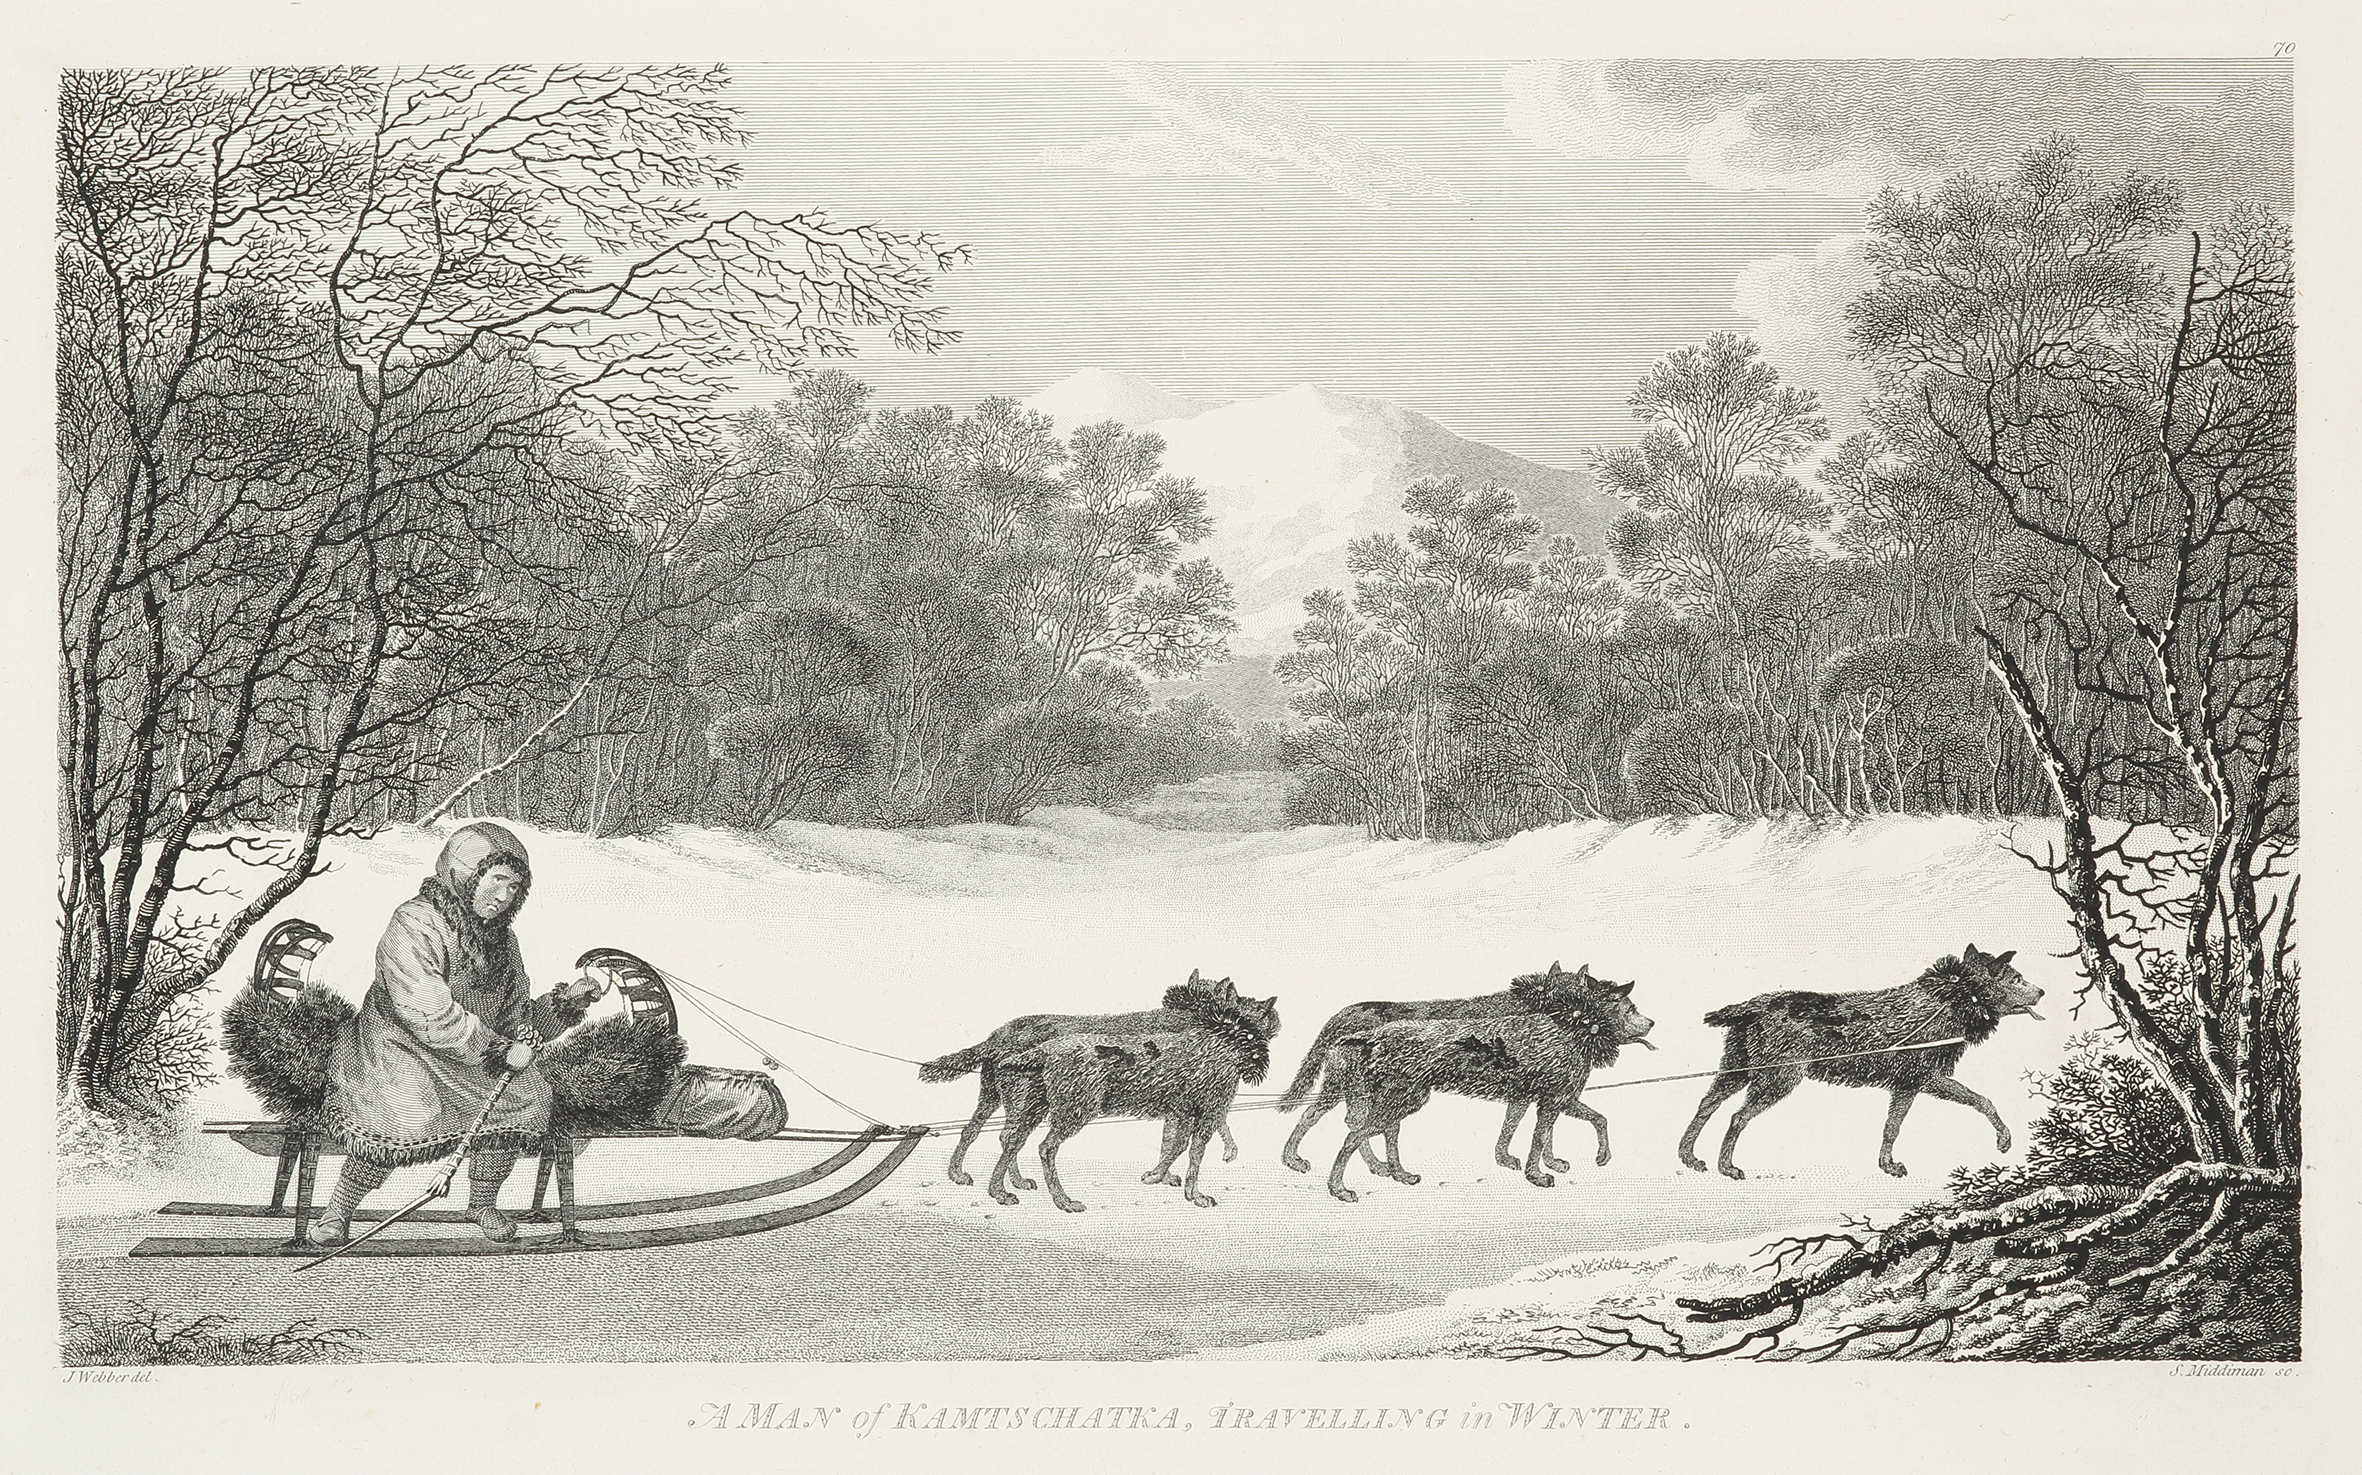 A Man of Kamtschatka, Travelling in Winter. - Antique View from 1784